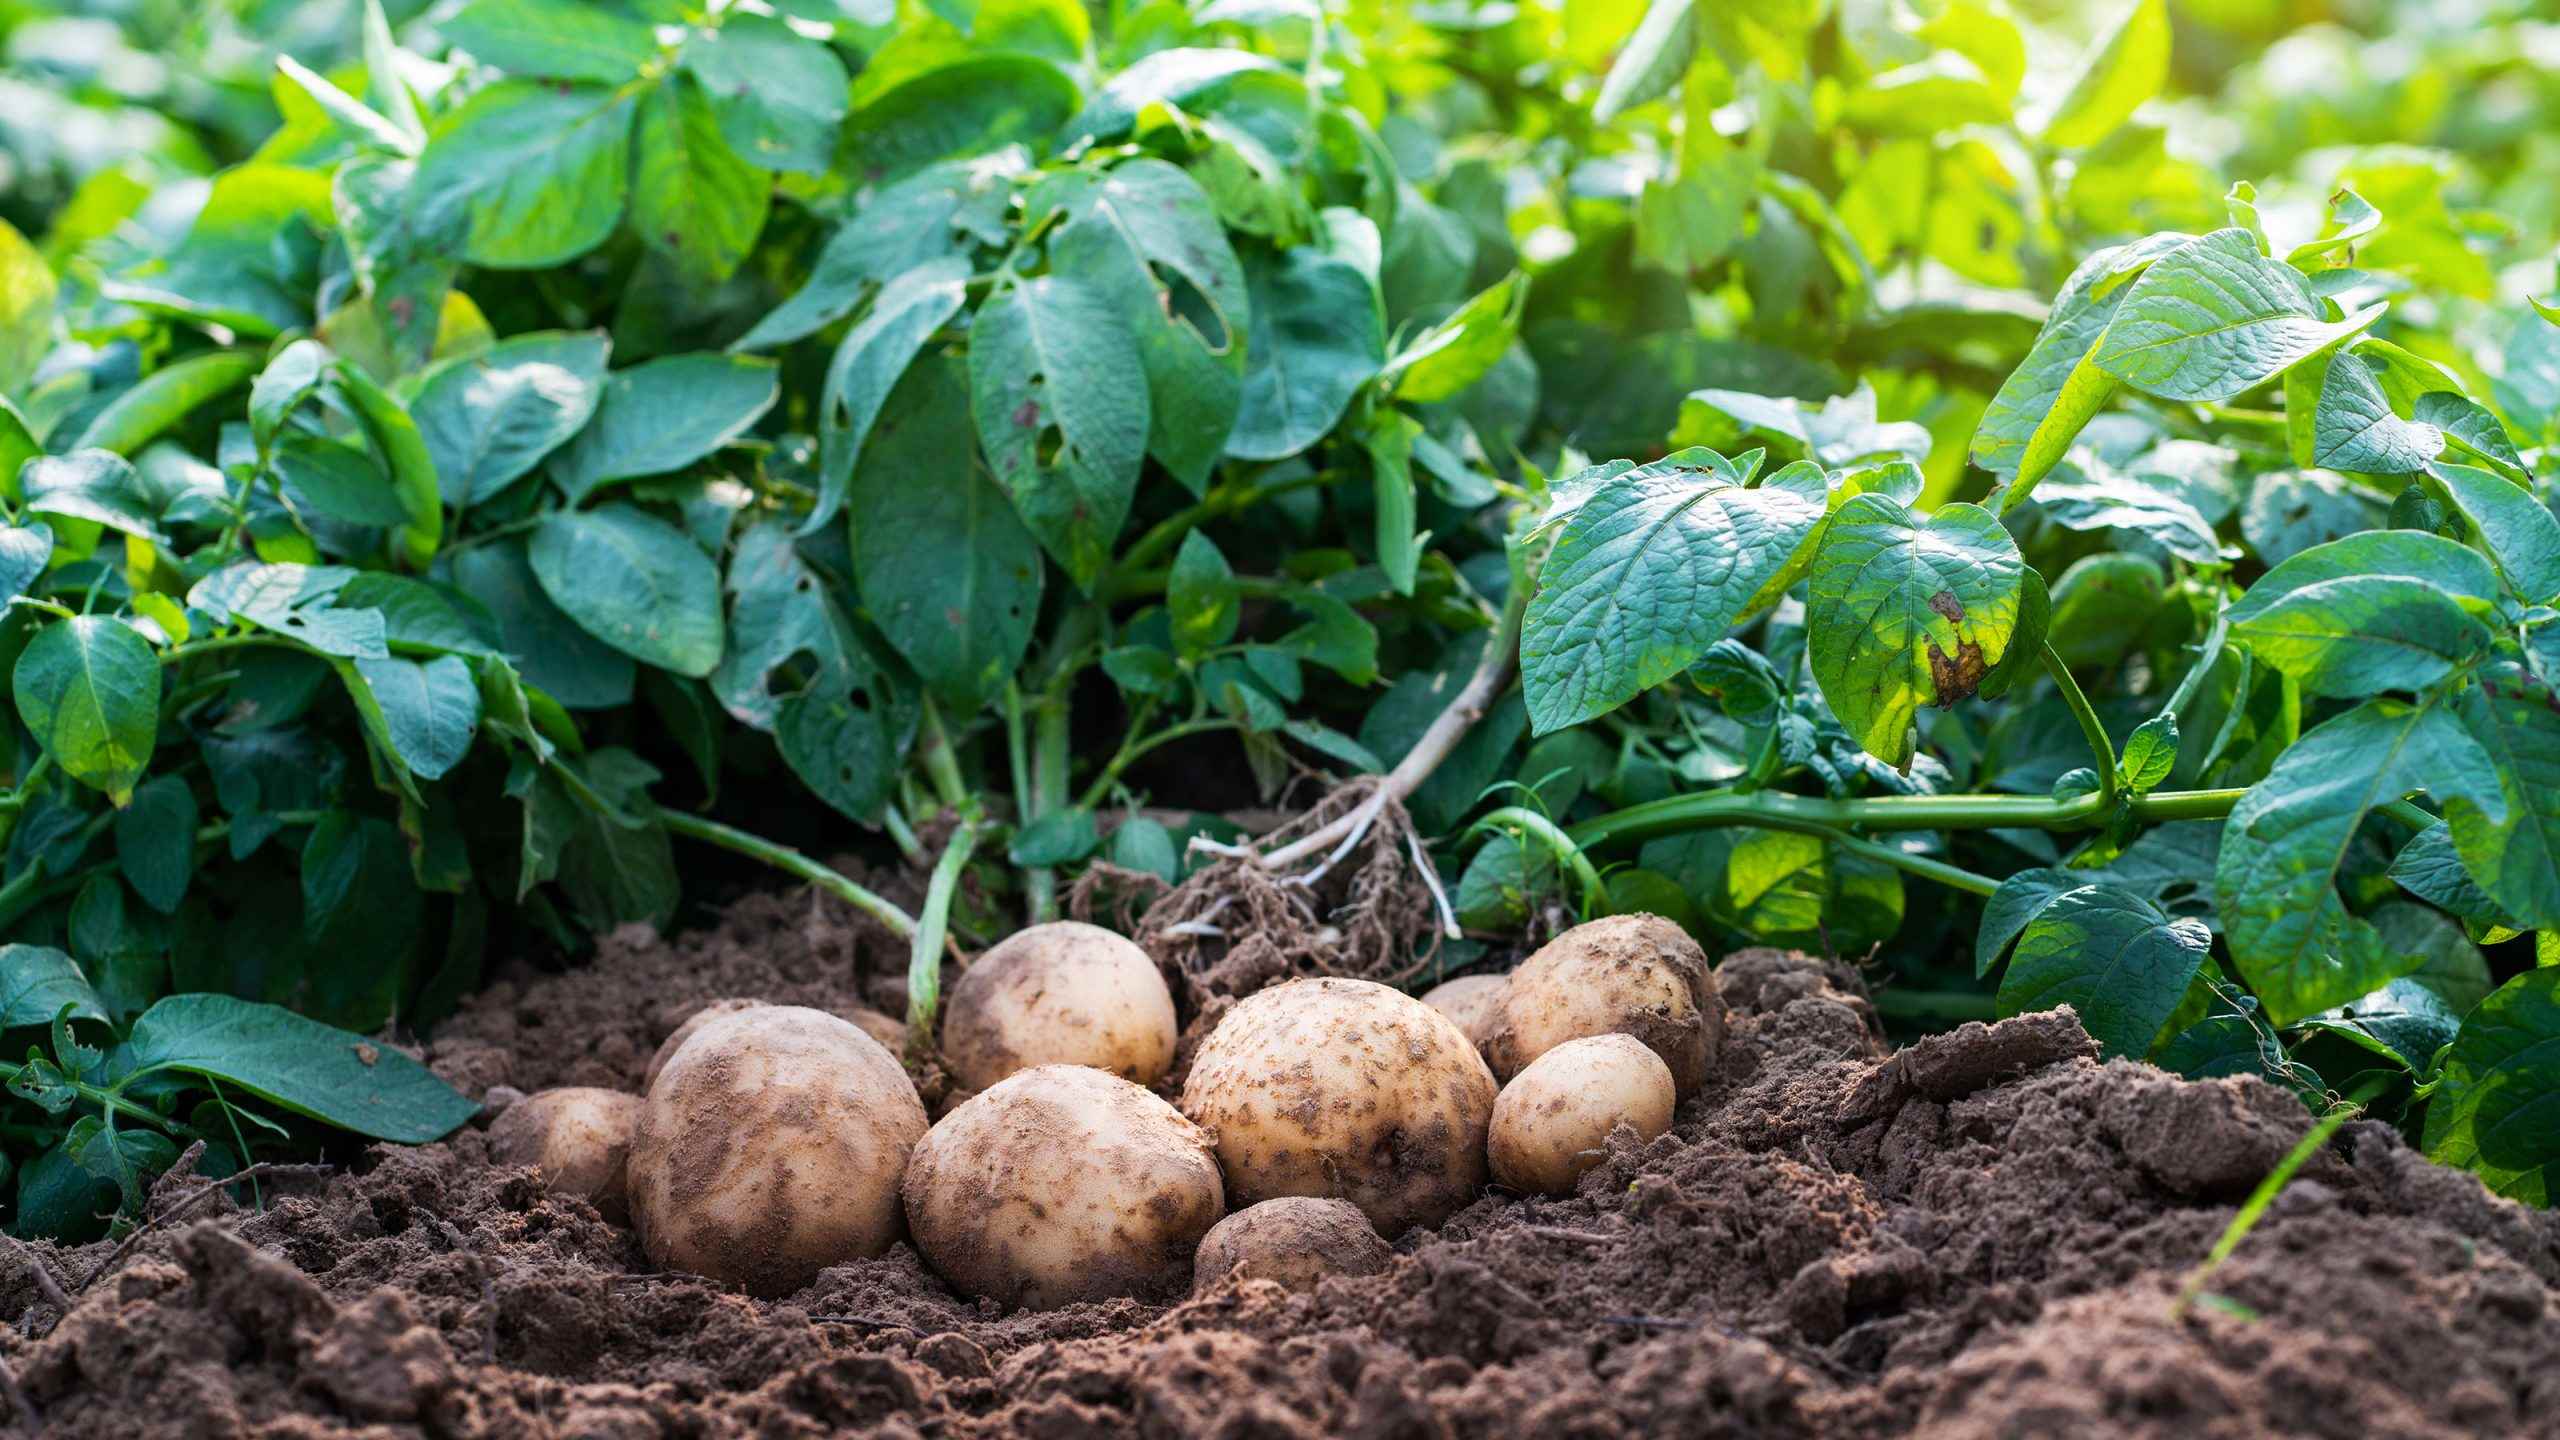 Where To Buy Potatoes For Planting